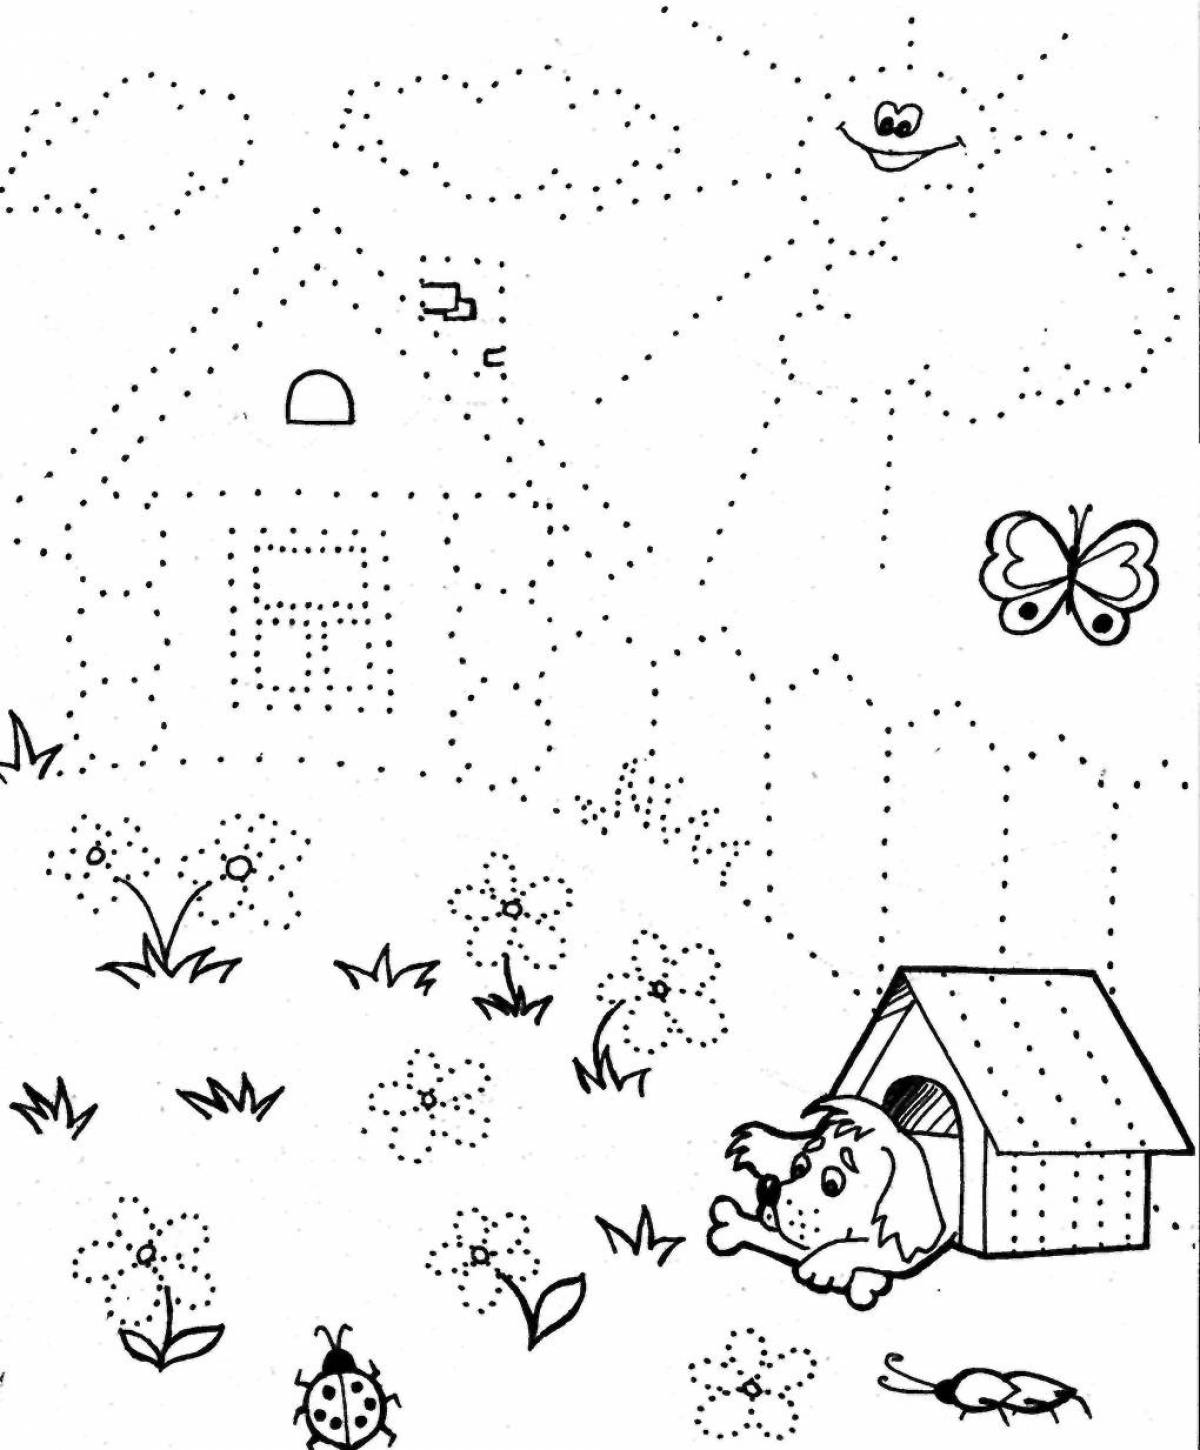 Adorable dotted coloring book for kids